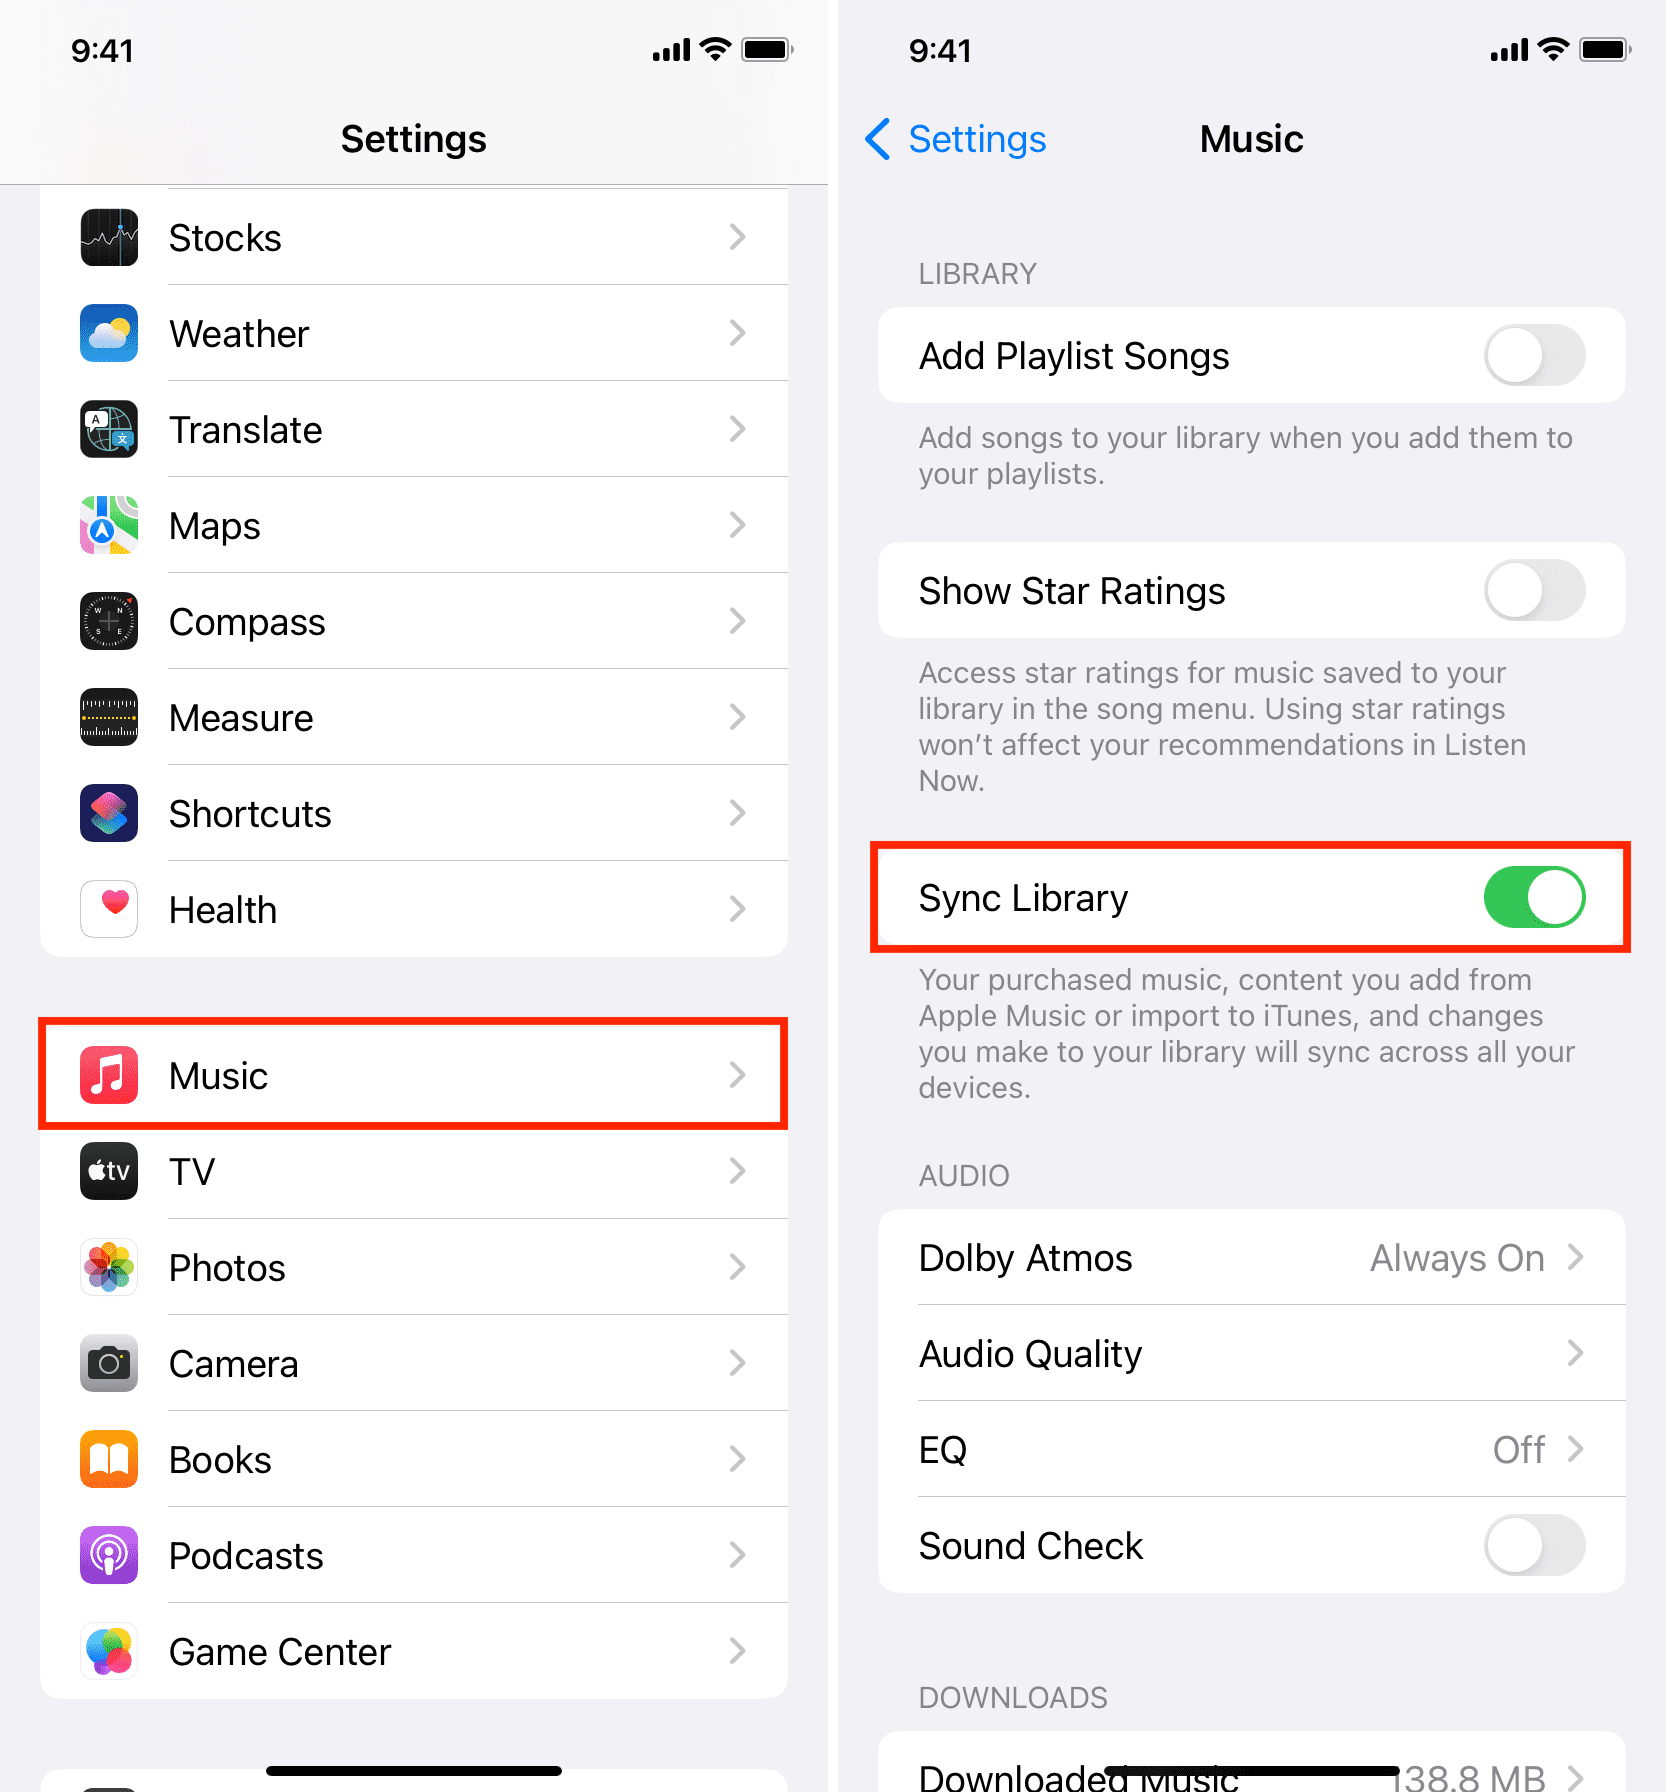 Turn on Sync Library in iPhone Music settings